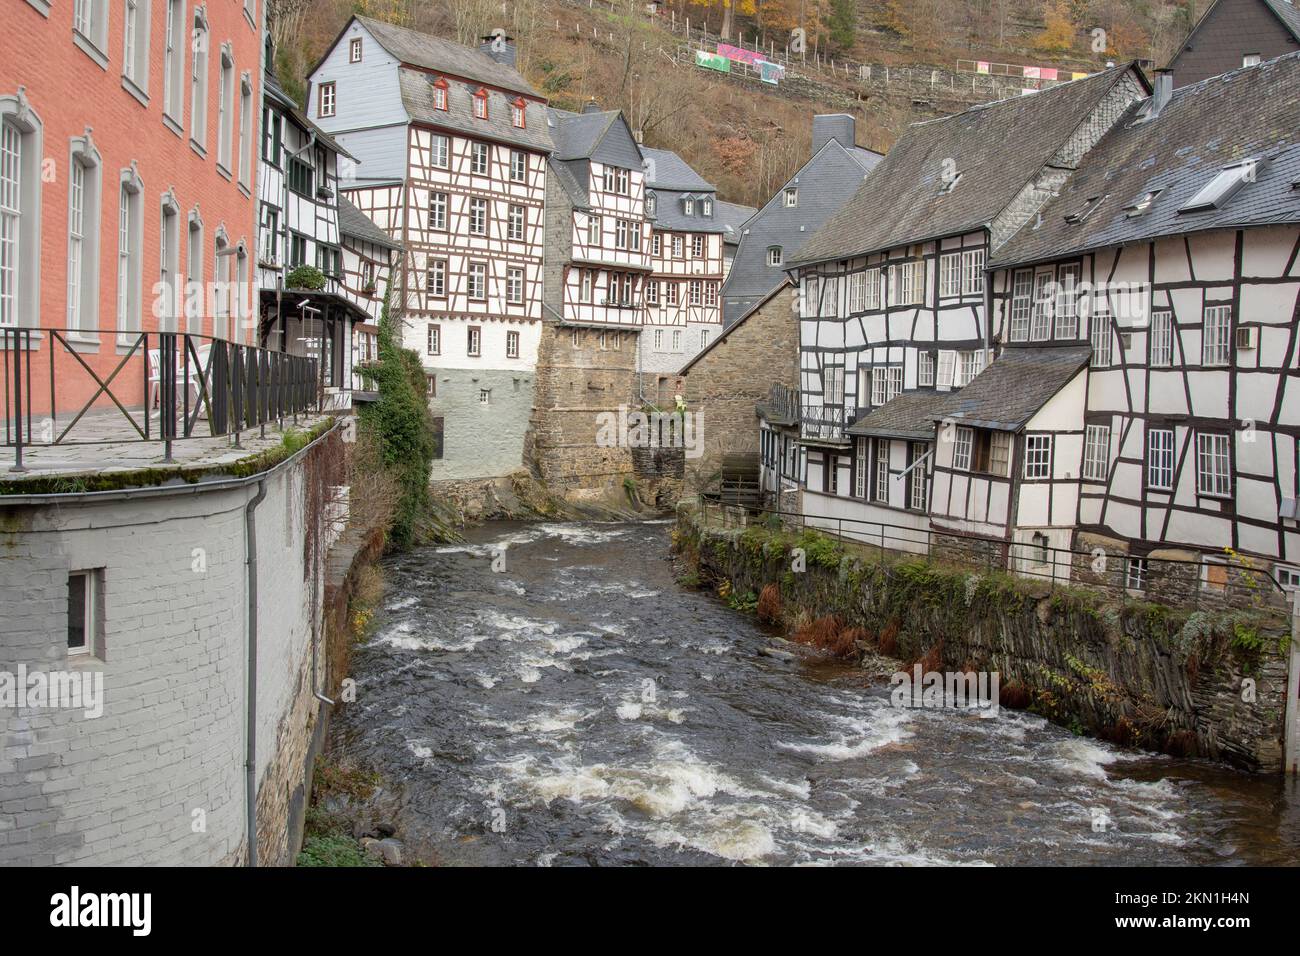 Monschau November 2022: The Monschau Christmas market traditionally opens on the first to fourth weekends in Advent, from November 25 to December 18, Stock Photo